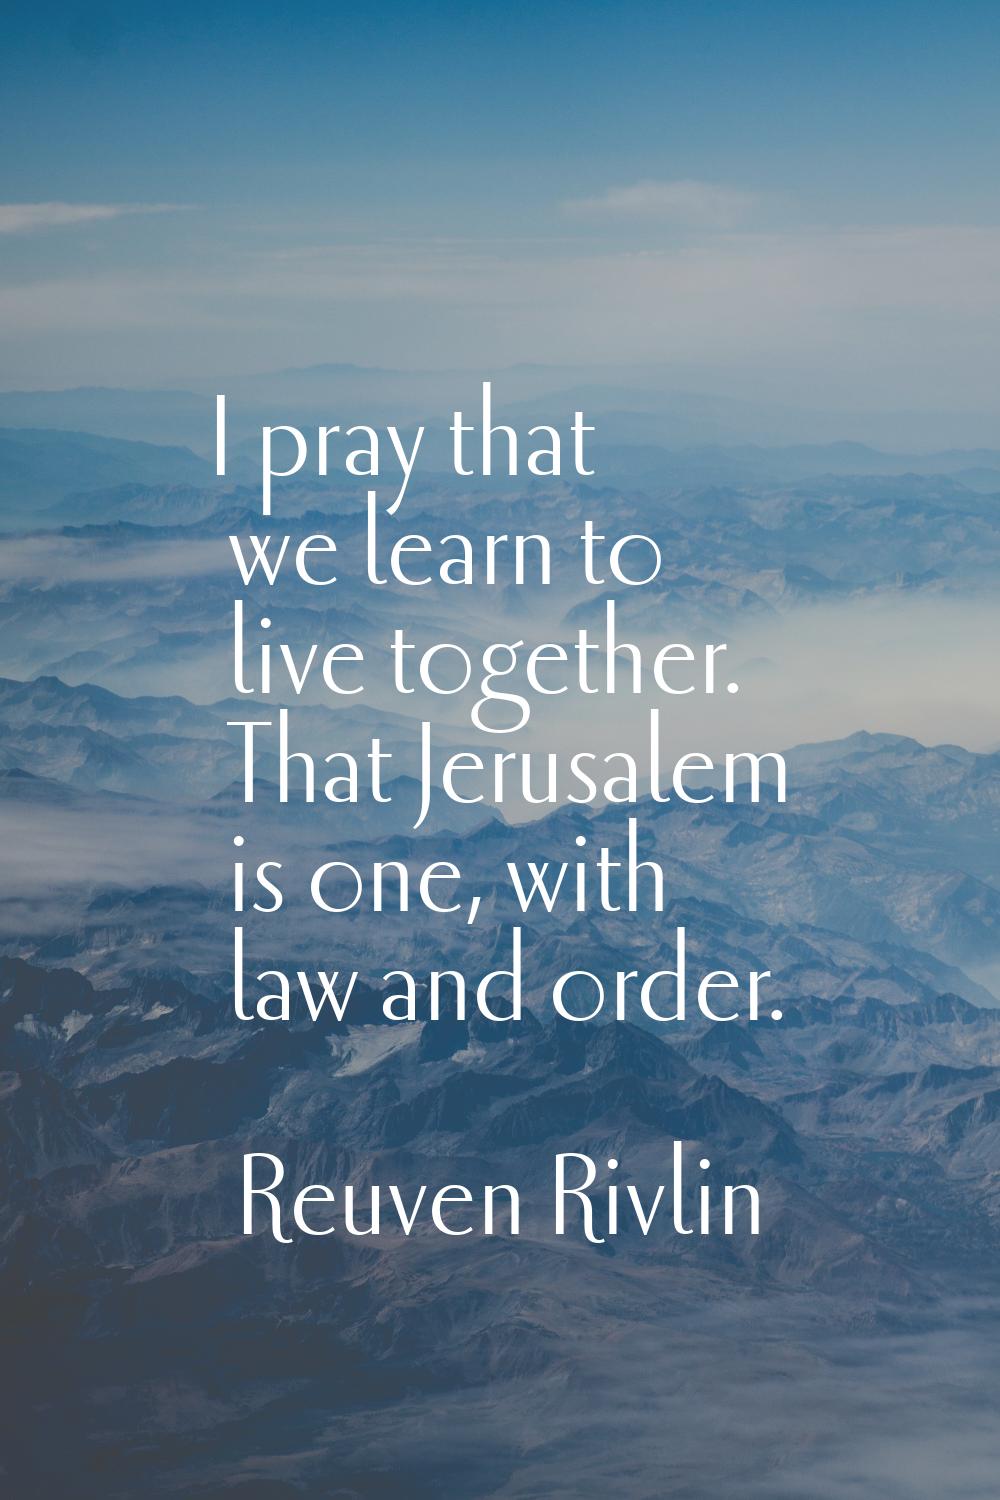 I pray that we learn to live together. That Jerusalem is one, with law and order.